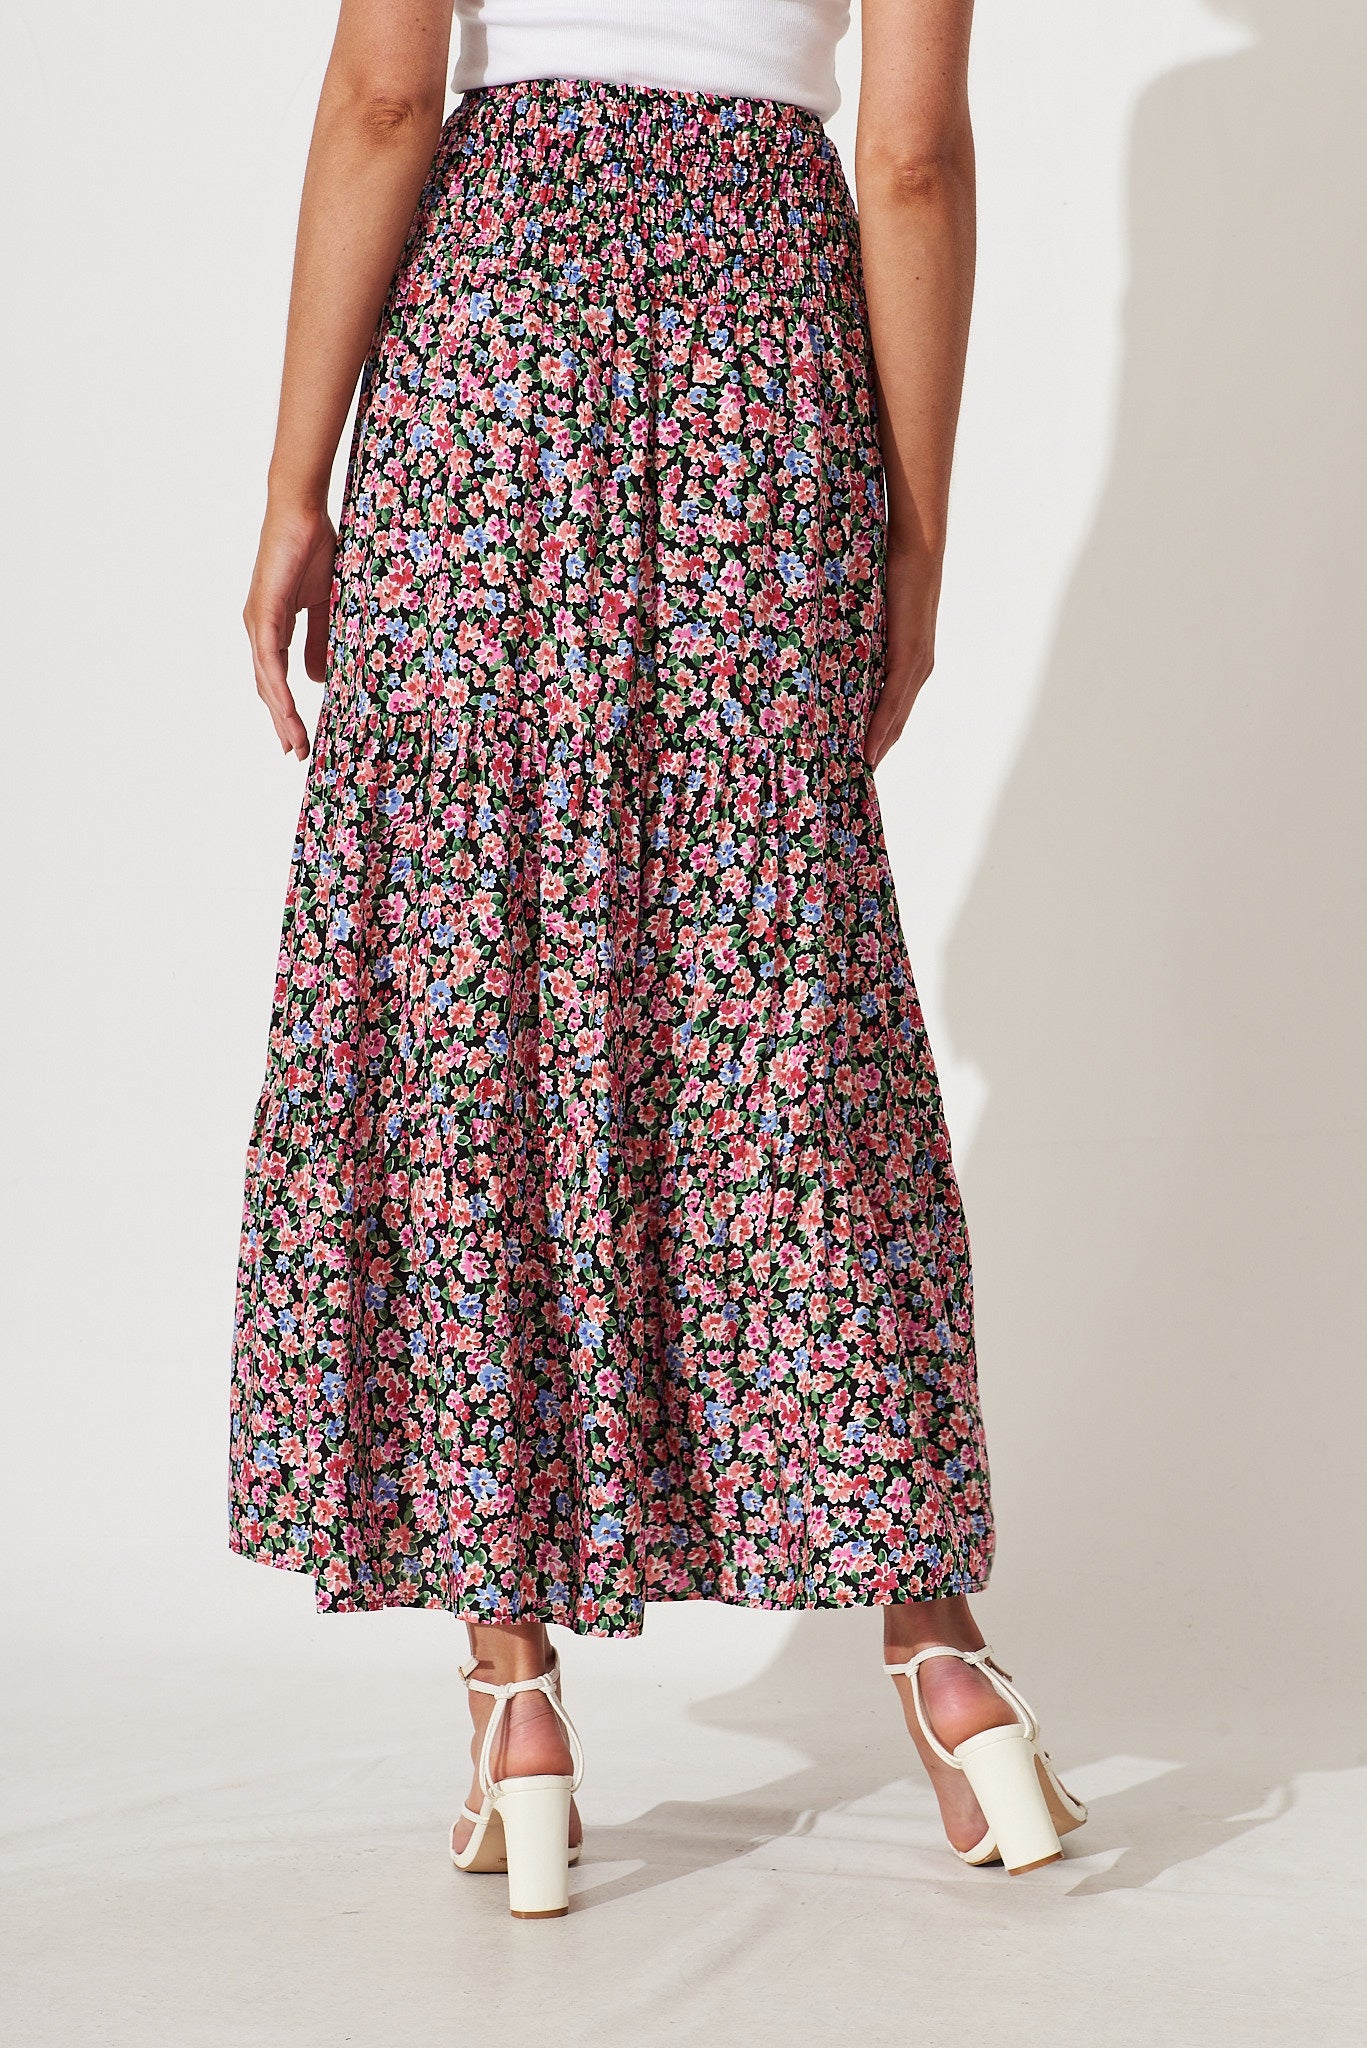 Macarena Maxi Skirt In Black With Multi Floral – St Frock